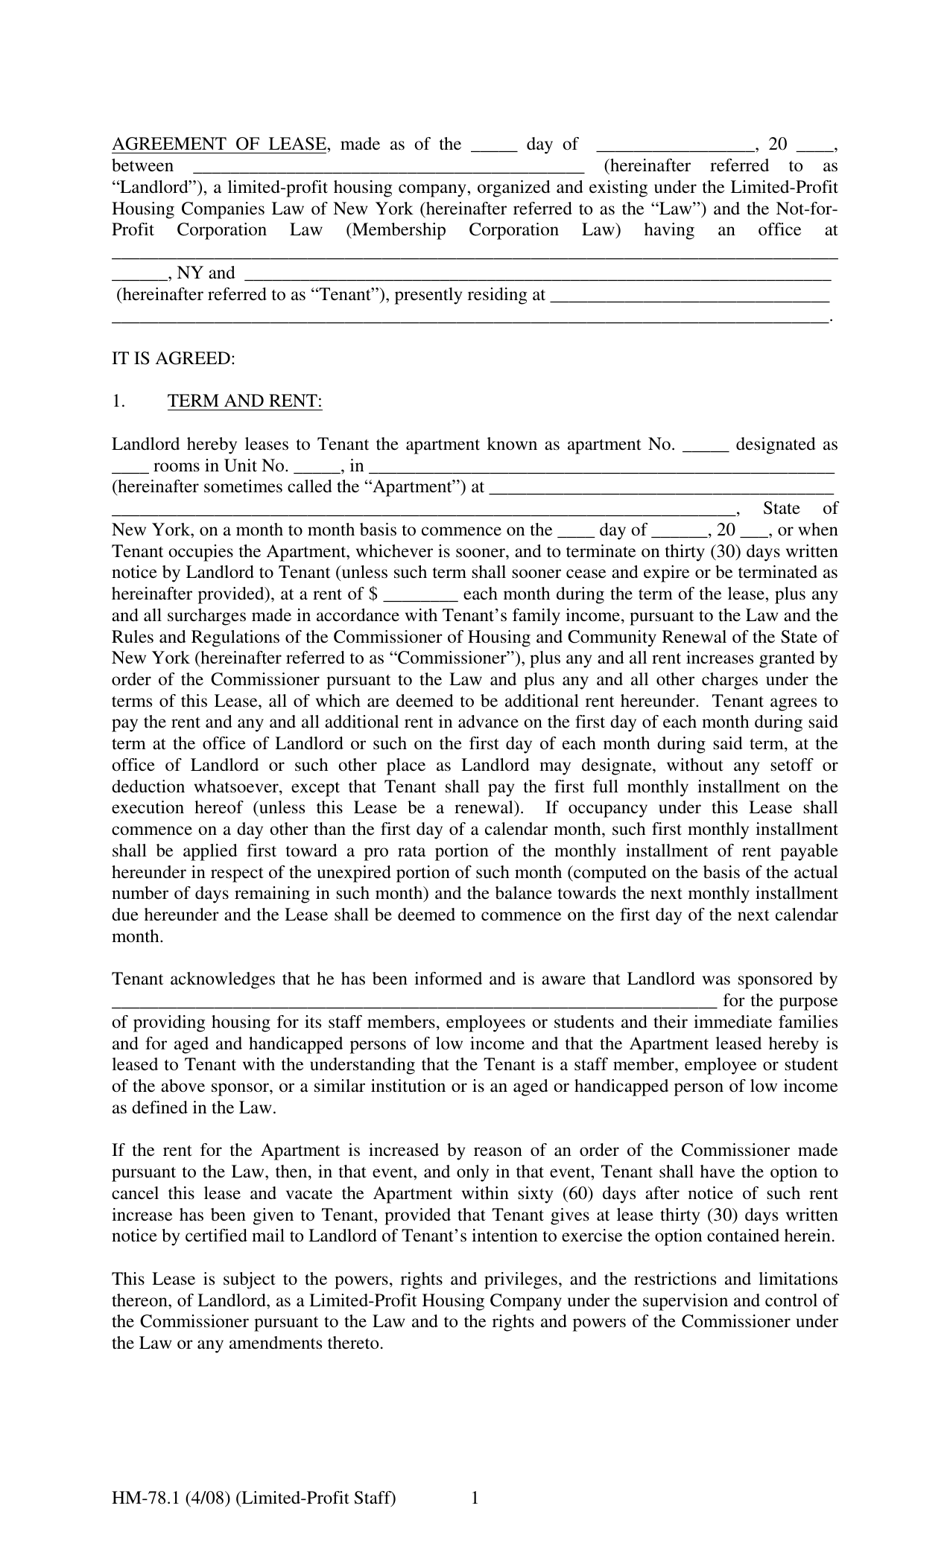 Form HM-78.1 Agreement of Lease, Limited Profit Staff - New York, Page 1